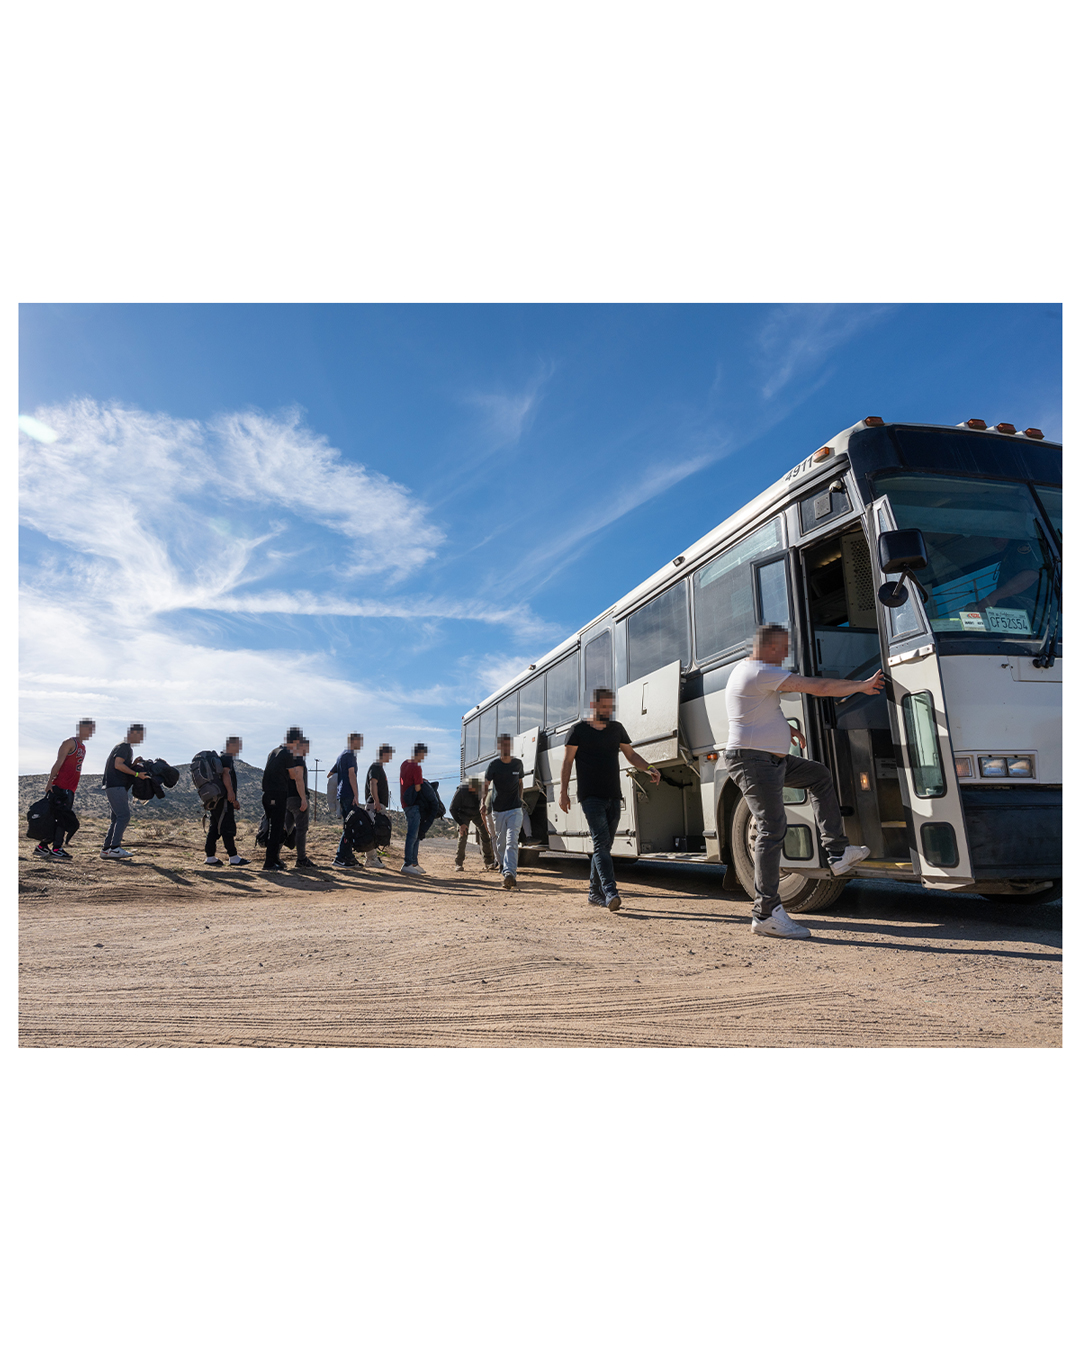 A group of a dozen male migrants line up to board a bus under a blue desert sky after placing their belongings in the bus. Most migrants have only a small backpack containing all their belongings.